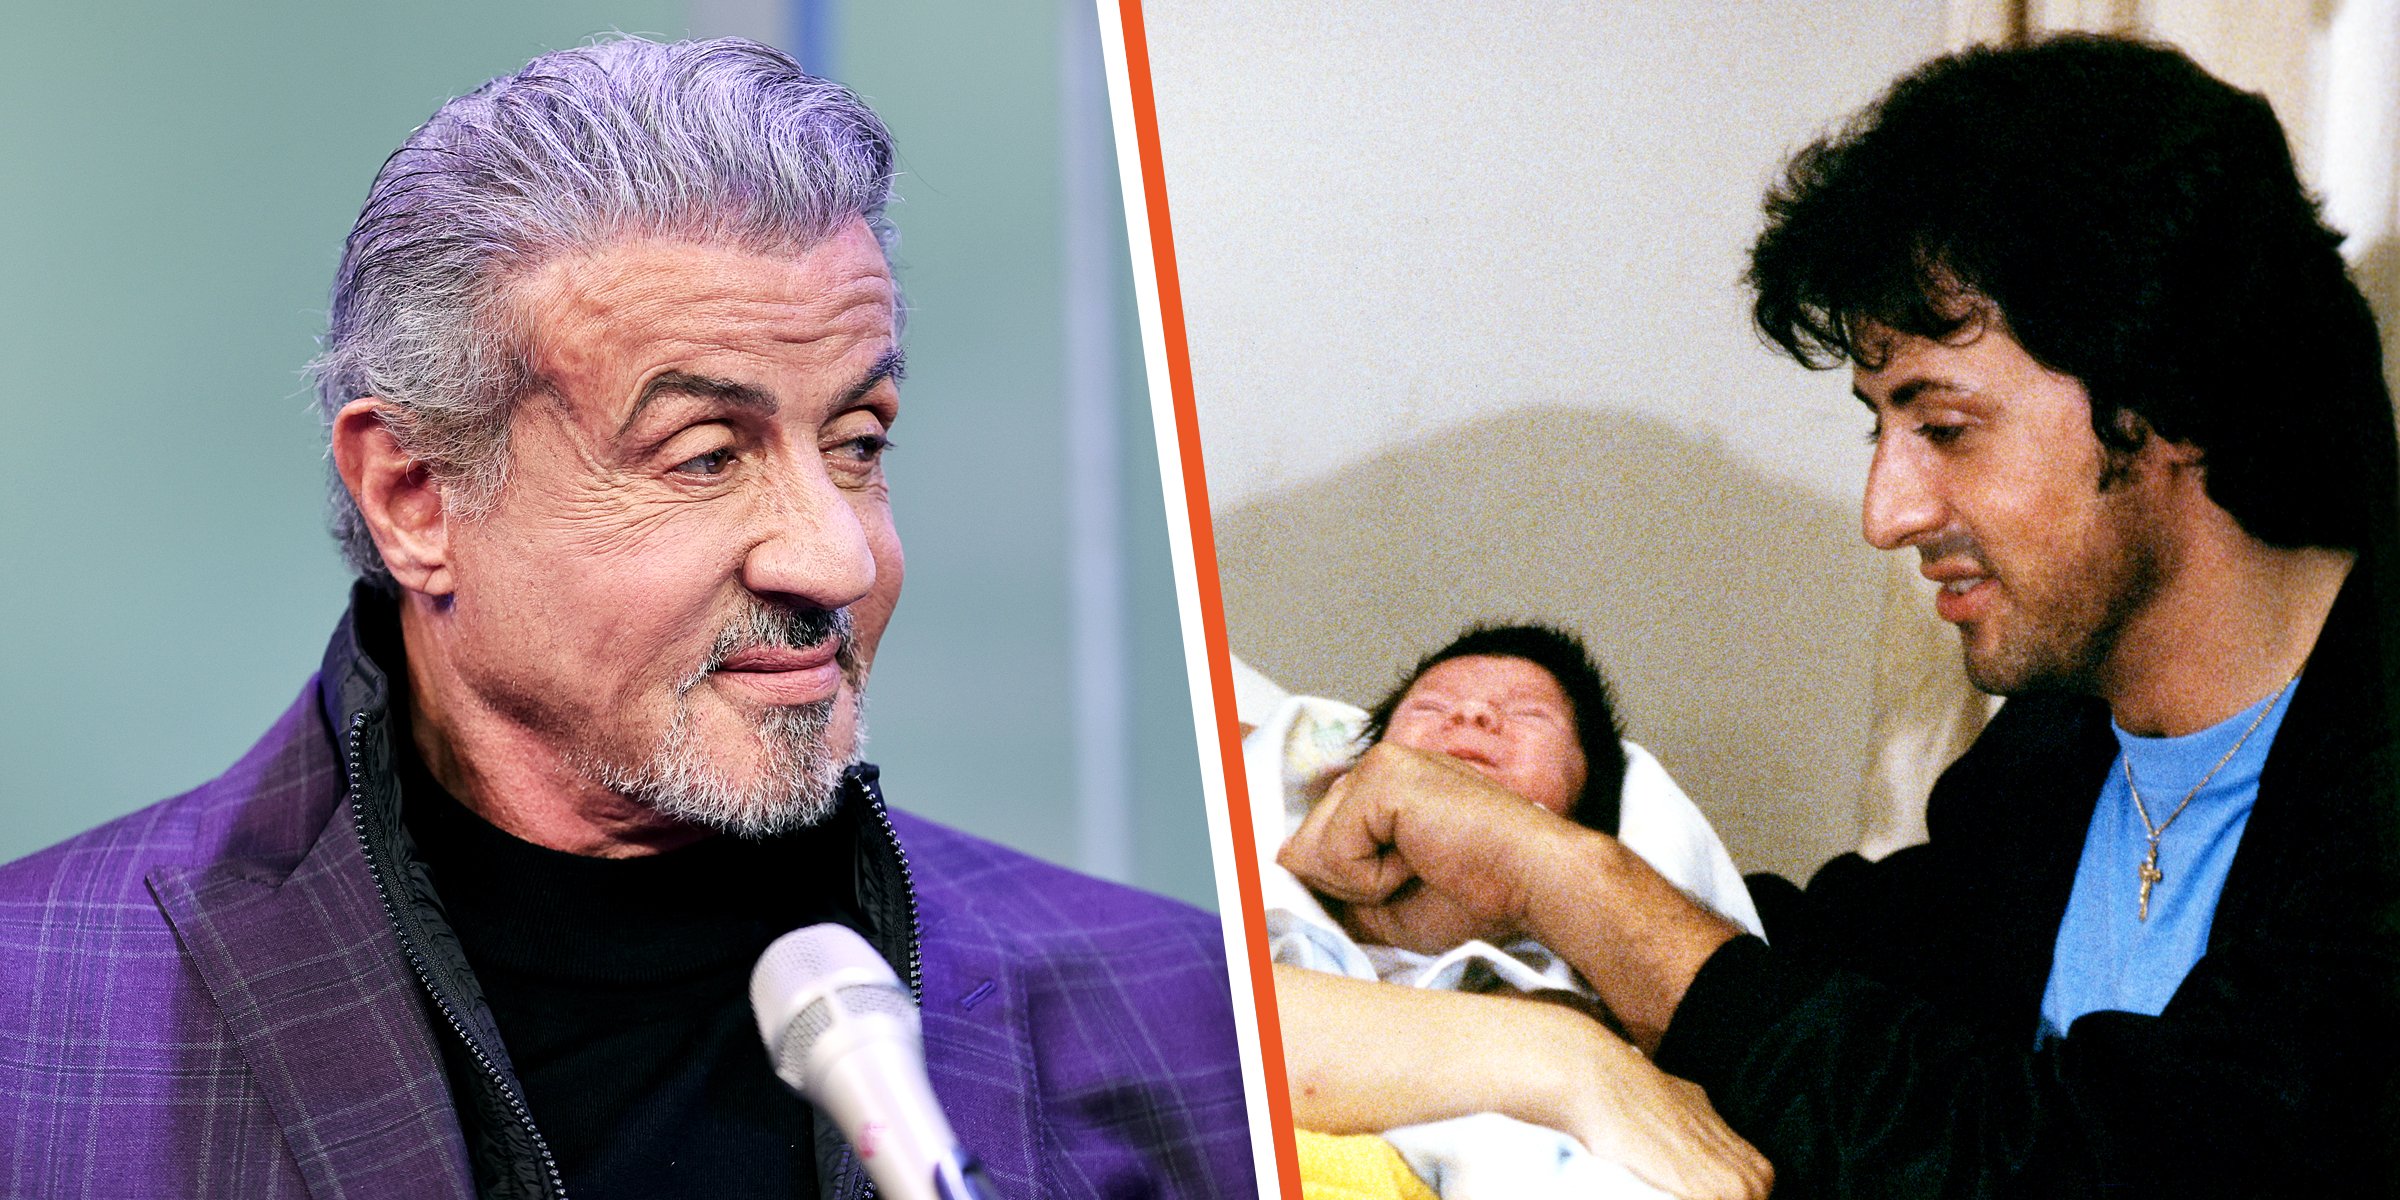 Sylvester Stallone┃Seargeoh Stallone and Sylvester Stallone ┃Quelle: Getty Images